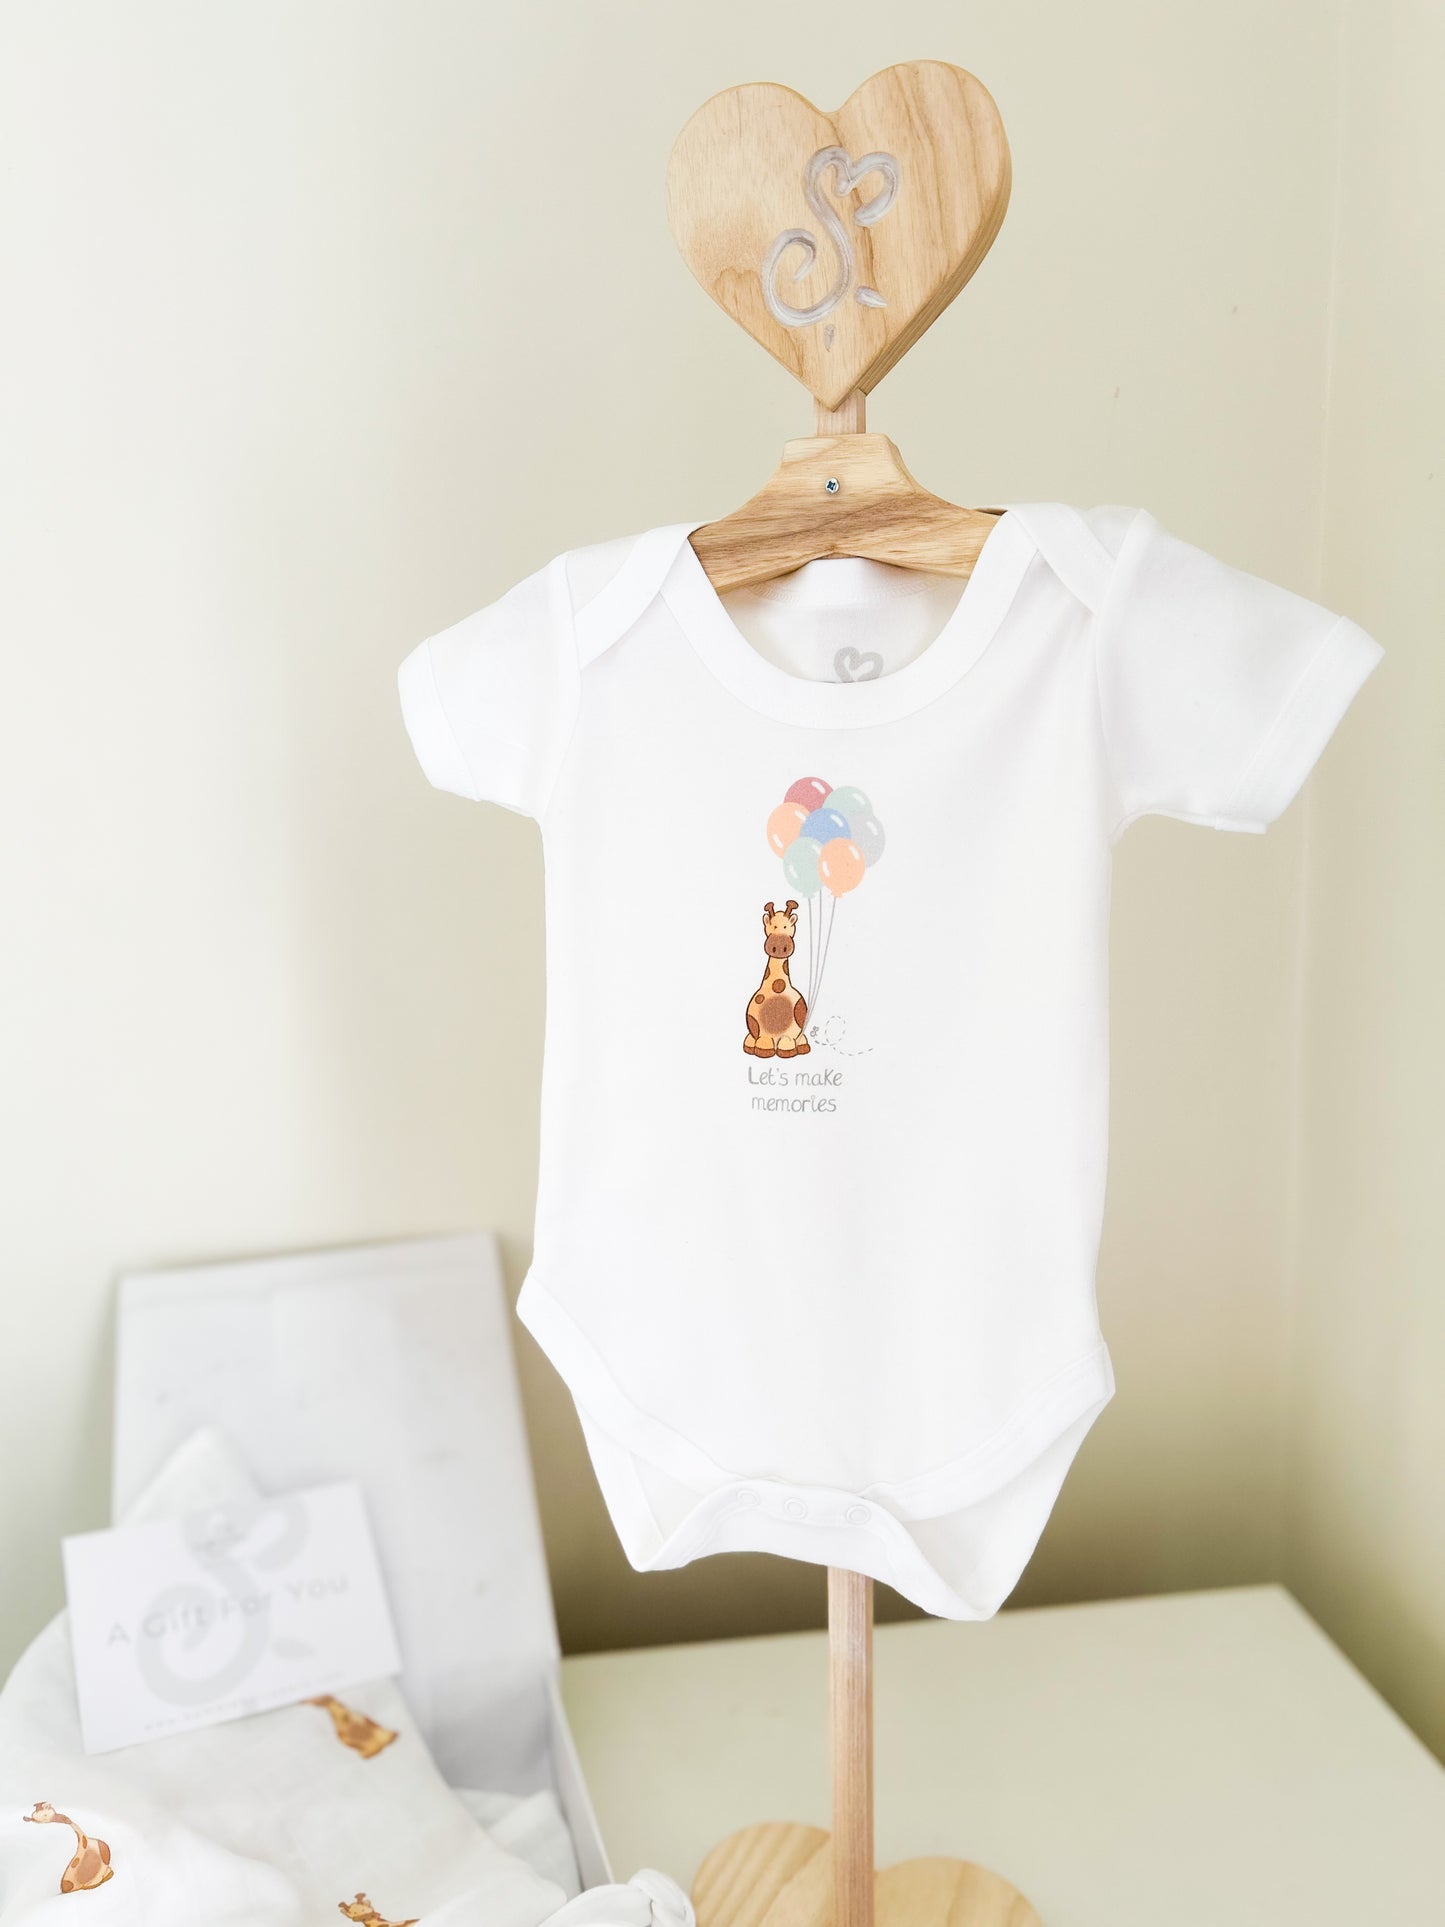 children's clothes stand with a white baby vest printed with a cute giraffe images holding some bright colourful balloons and "let's make memories" text